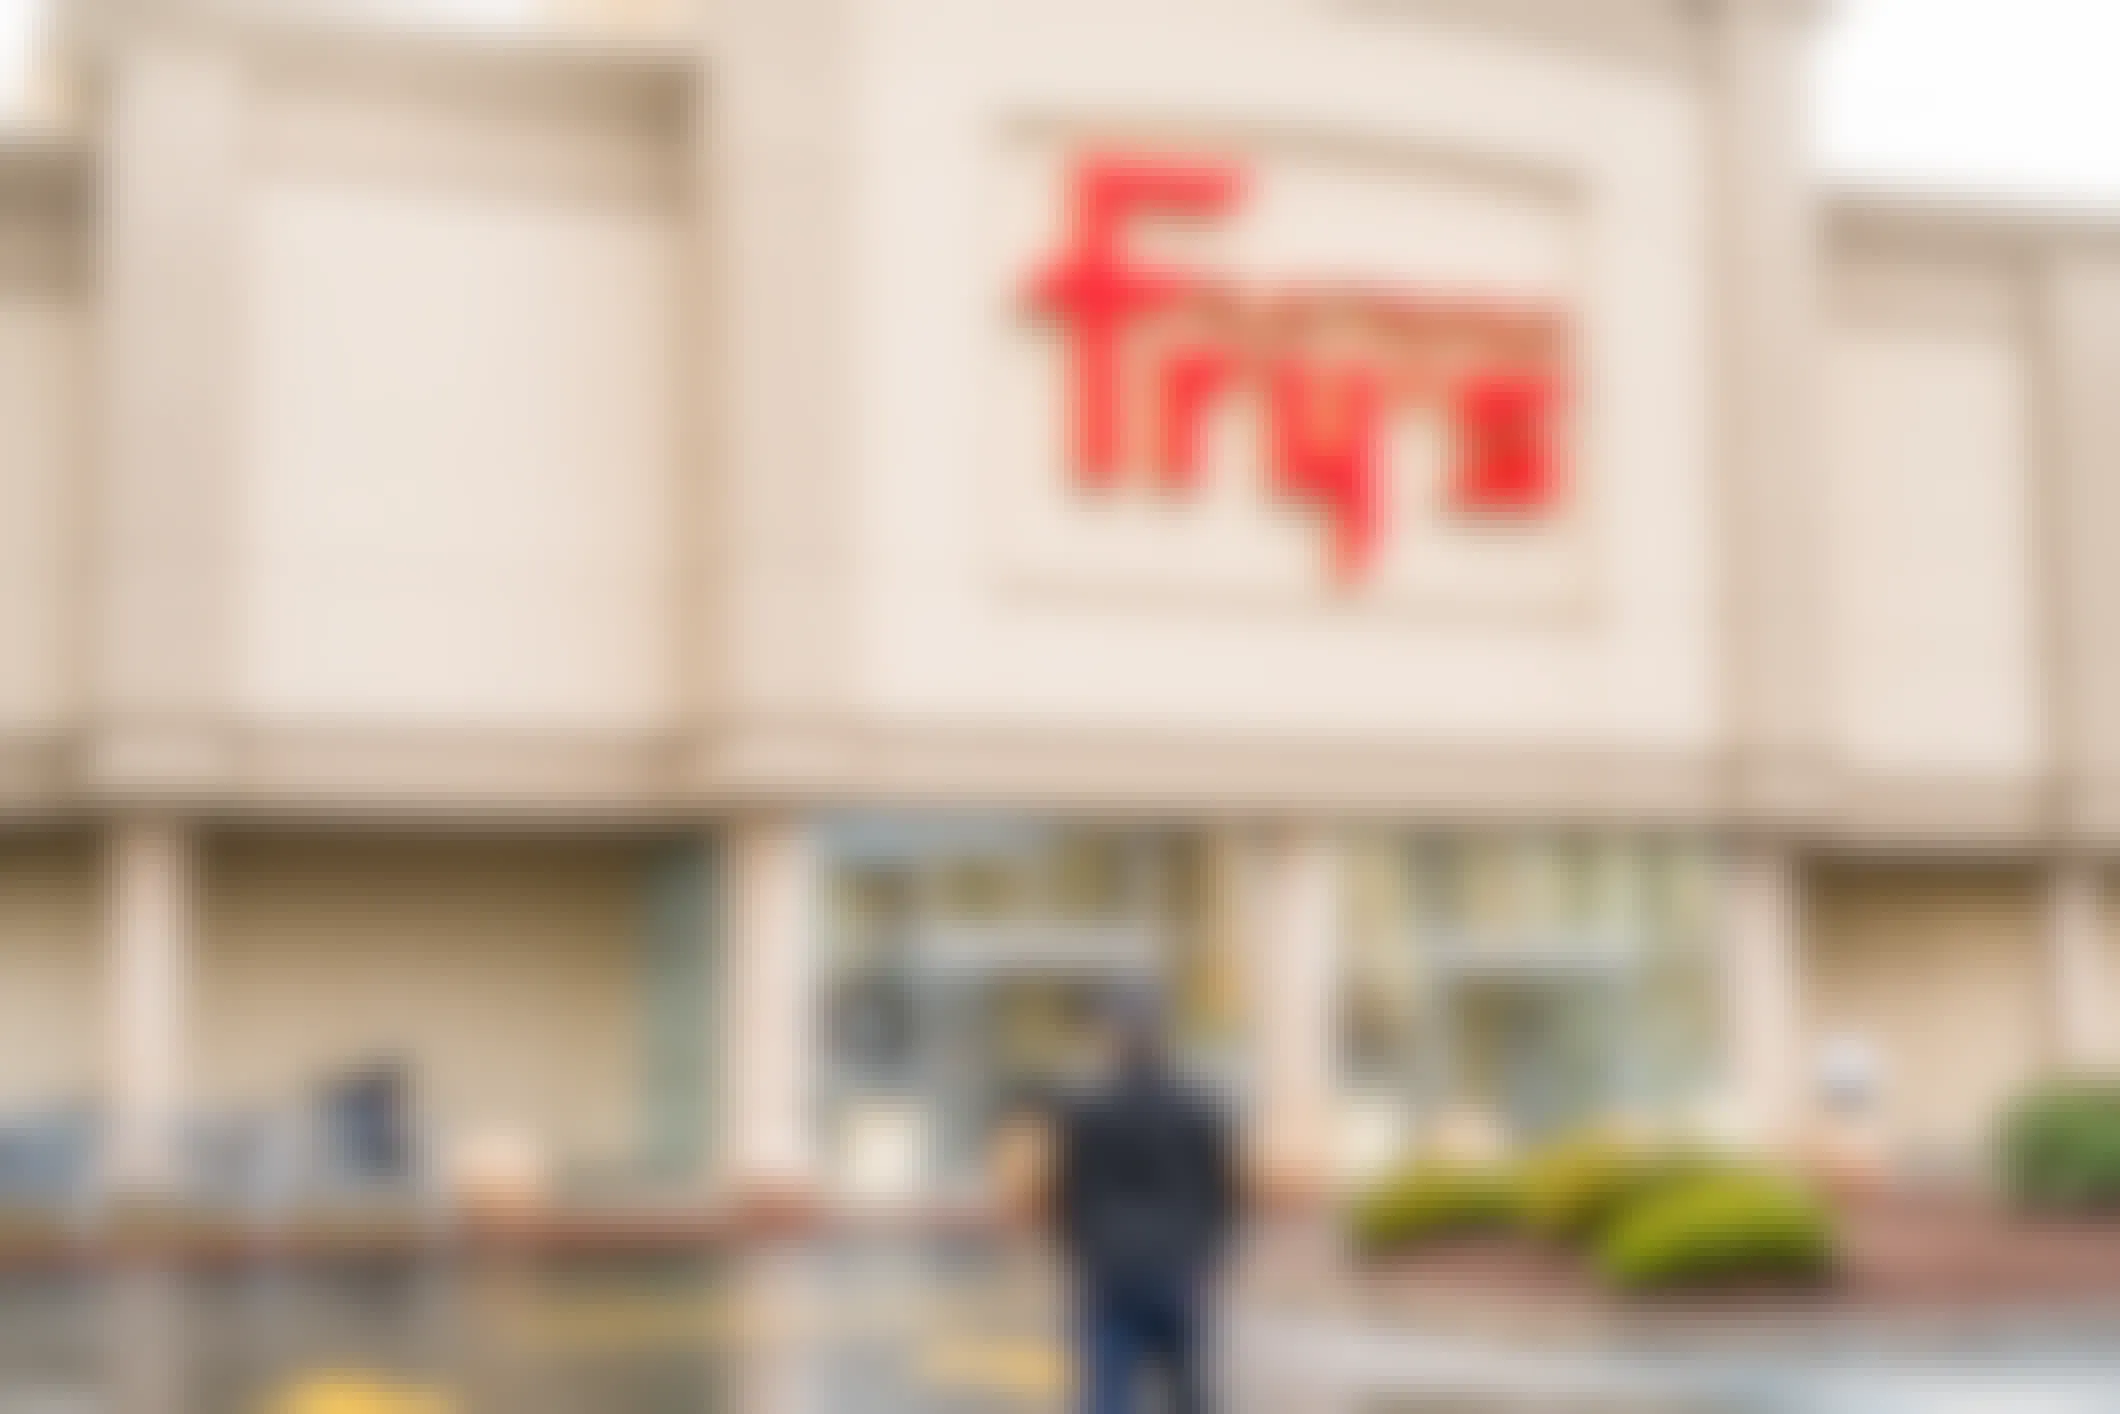 Fry's Electronics Abruptly Closed All Locations Forever